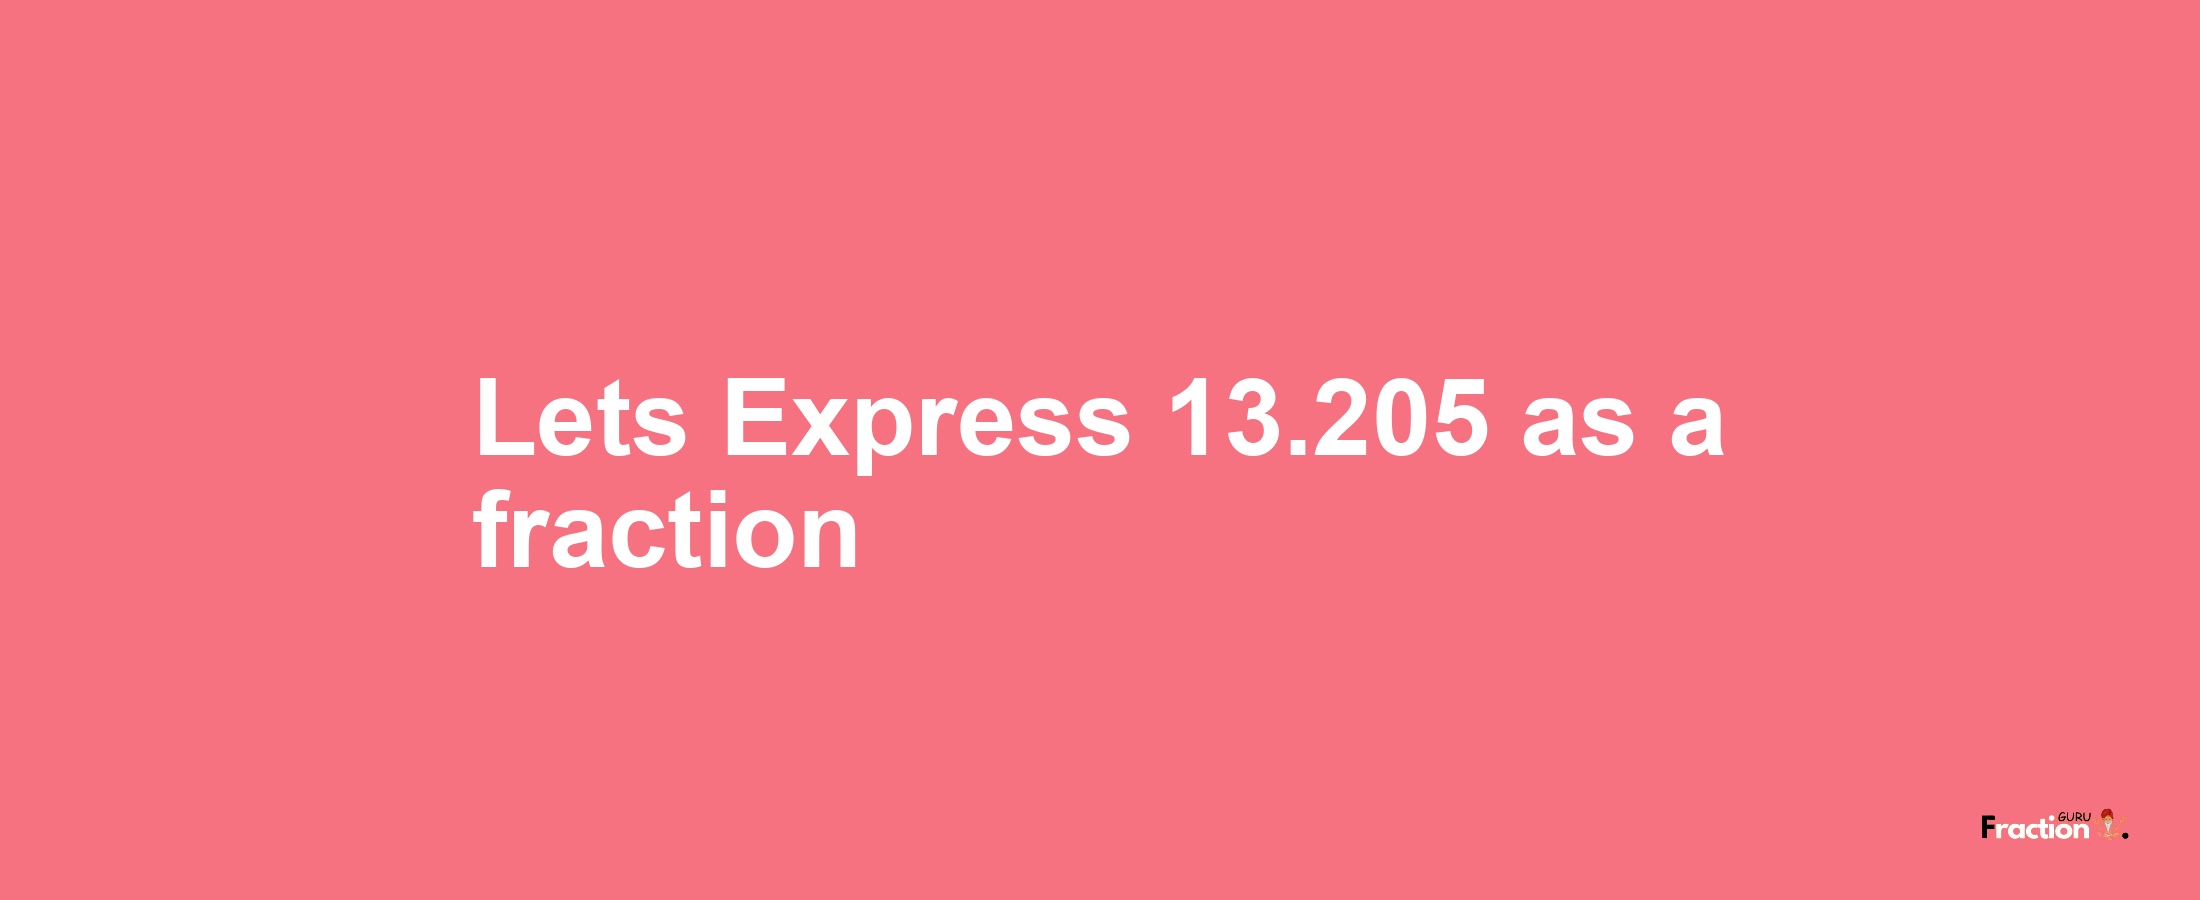 Lets Express 13.205 as afraction